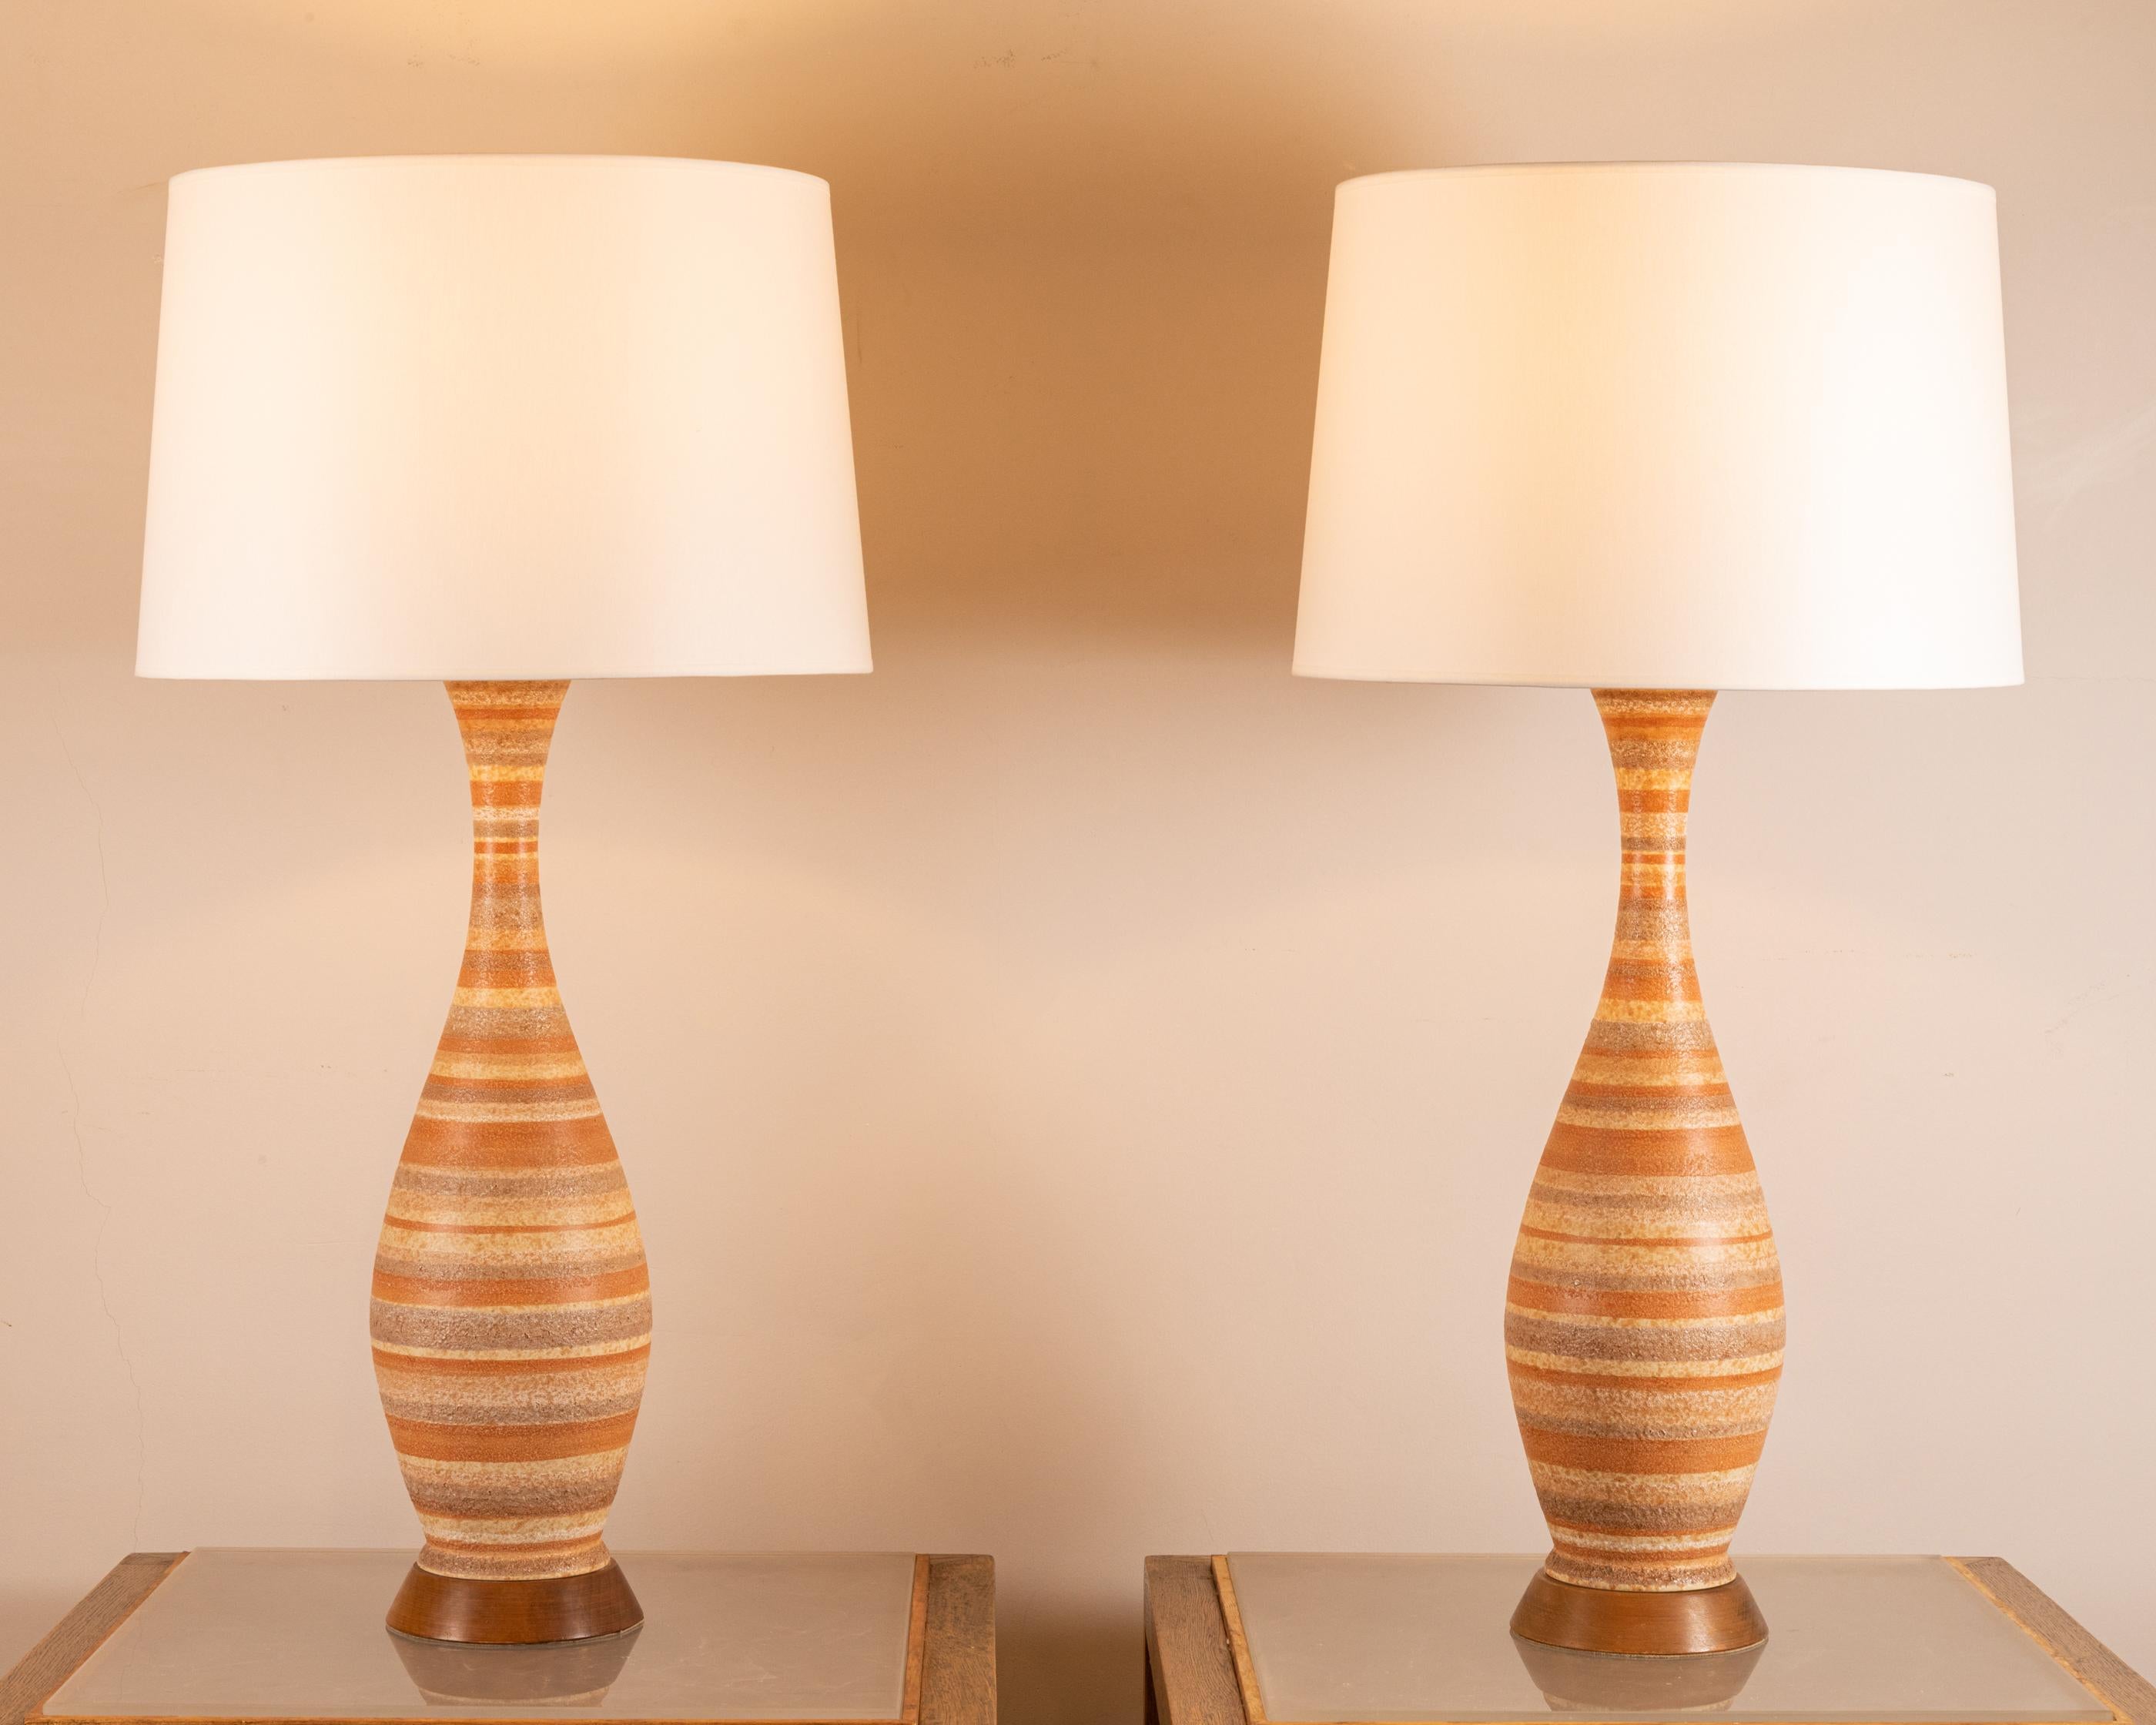 Pair of tall bottle-shaped ceramic lamps
 With stripes motives.
On wood bases.
Attributed to Bitossi
Italy, 1950’s
Height ( total with shade) : 90 cm (35,43 inch)
Height ( ceramic) : 60 cm (23,62 inch )
Diameter ( shades ) : 45 cm (17,71